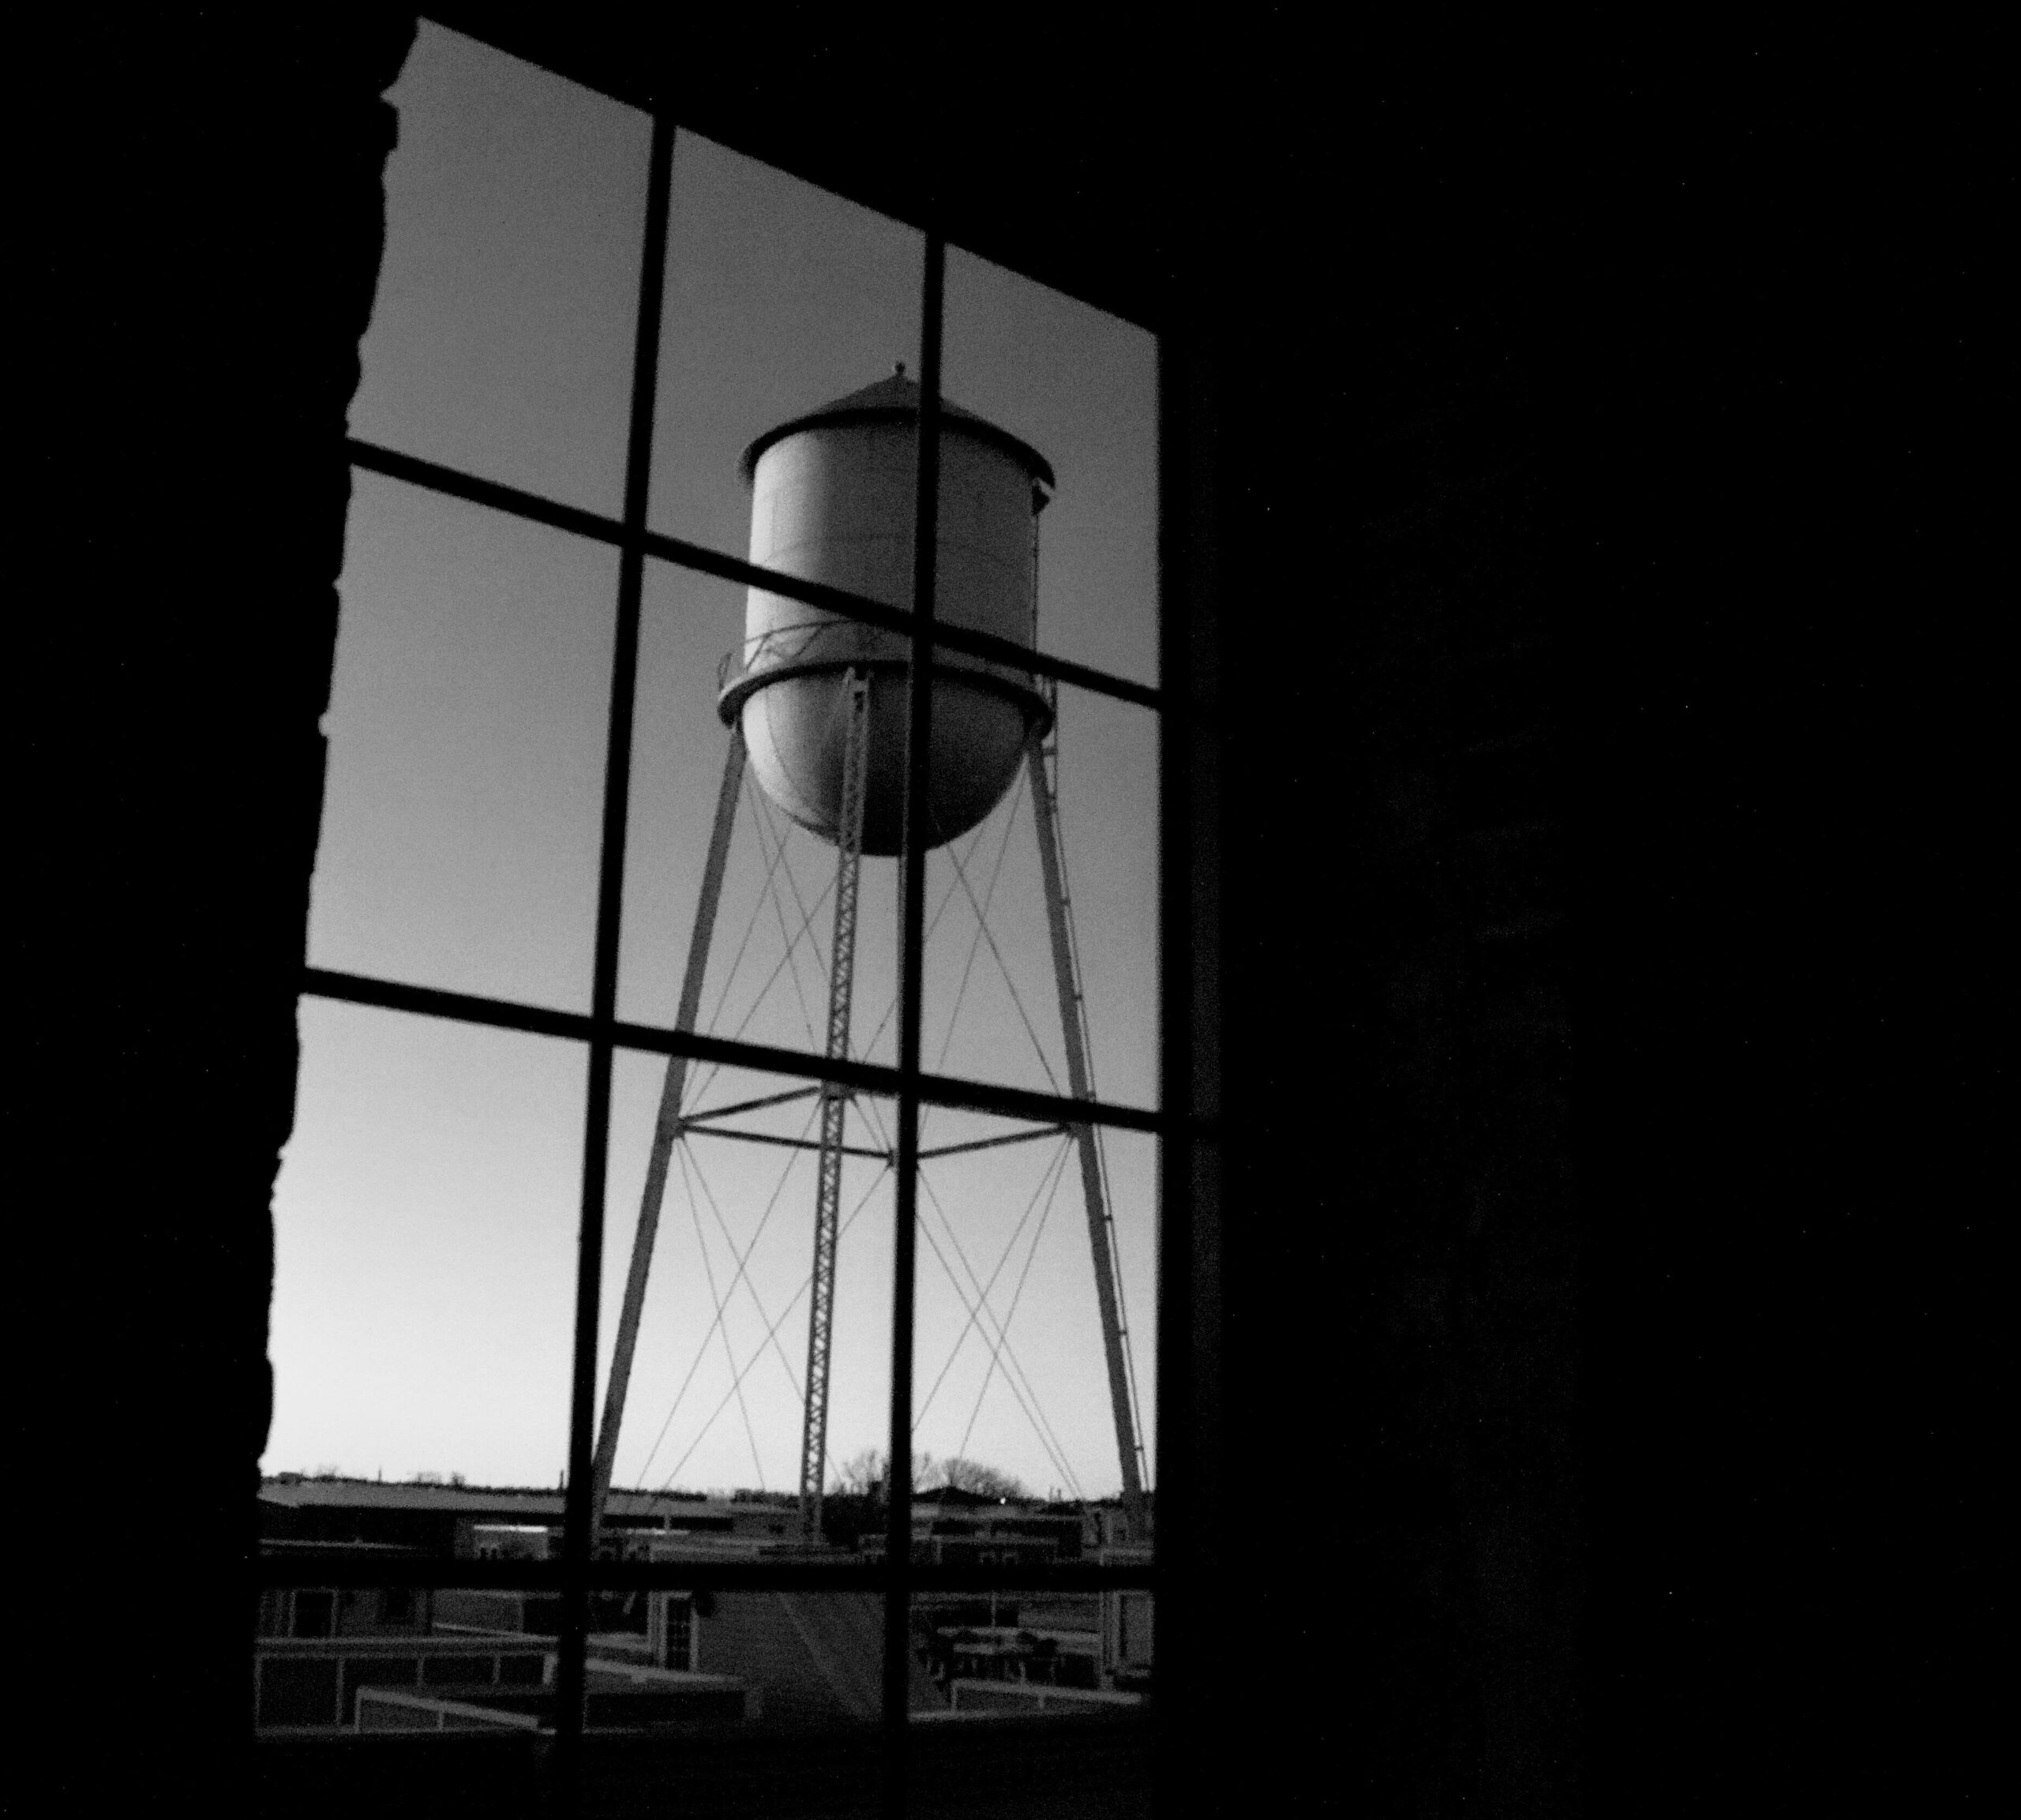 Black and white photography of a water tower in Richmond VA